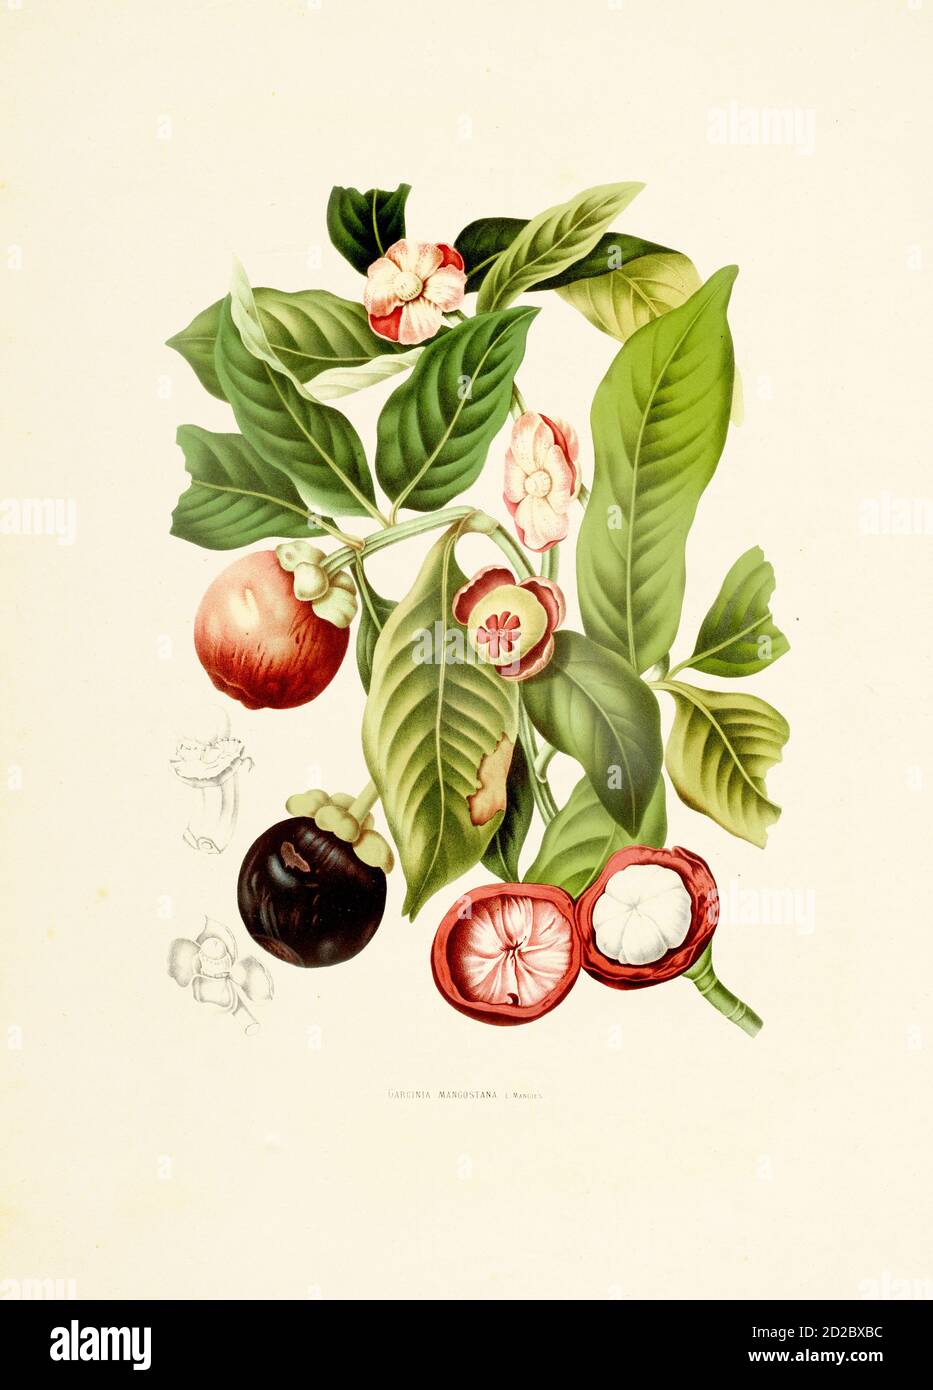 19th-century engraving of a garcinia mangostana (also known as purple mangosteen or simply mangosteen). Illustration by Berthe Hoola van Nooten from t Stock Photo